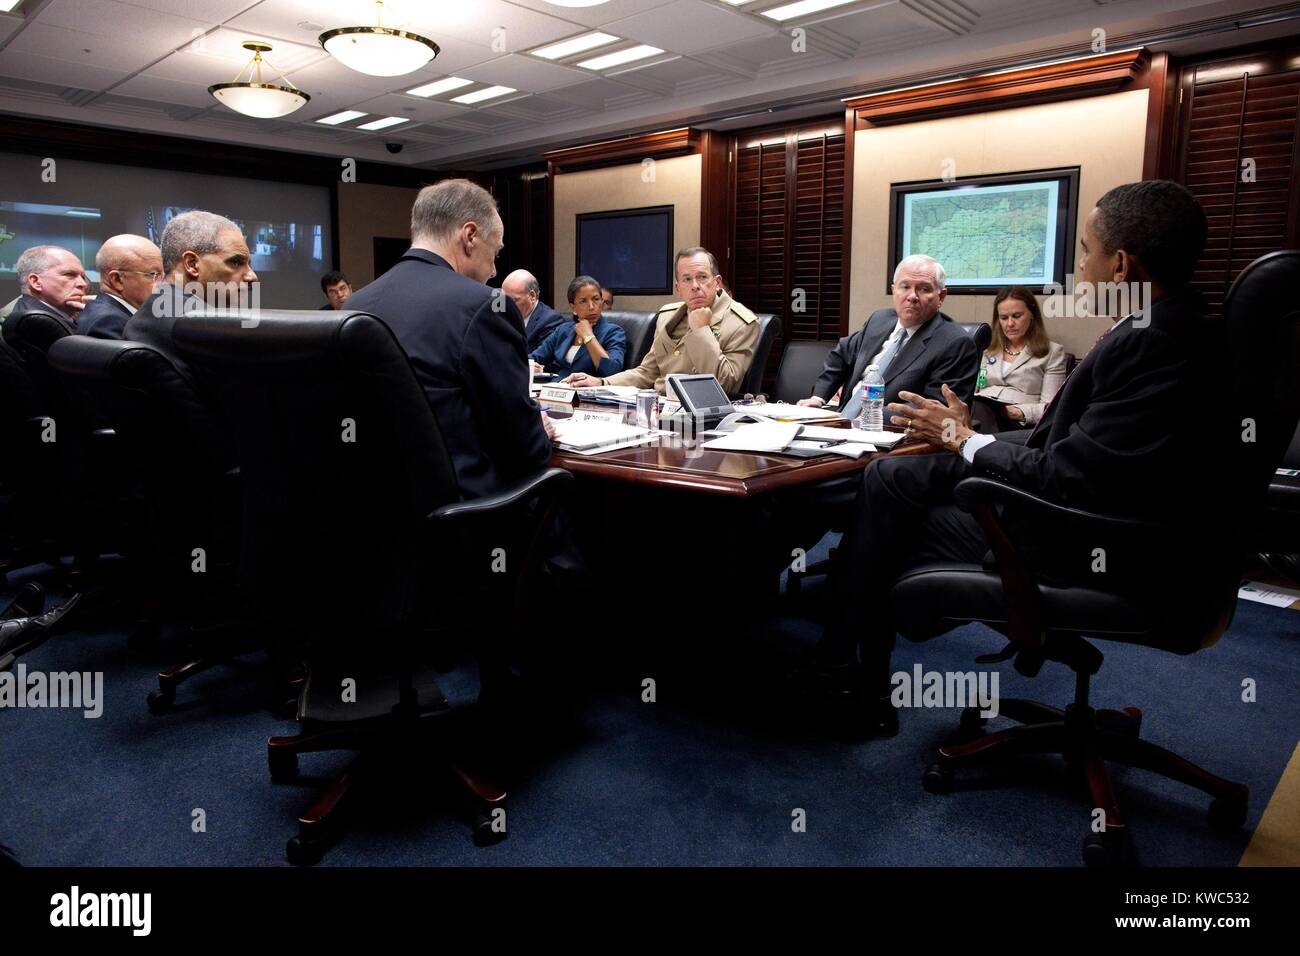 President Obama meets with national security team on Afghanistan and Pakistan, April 25, 2011. Situation Room of the White House, clockwise from President: Tom Donilon, Eric Holder, James Clapper, John Brennan, Neal Wolin, Bill Daley, Susan Rice, Adm. Michael Mullen, Robert Gates, and Michele Flournoy (BSLOC 2015 13 265) Stock Photo